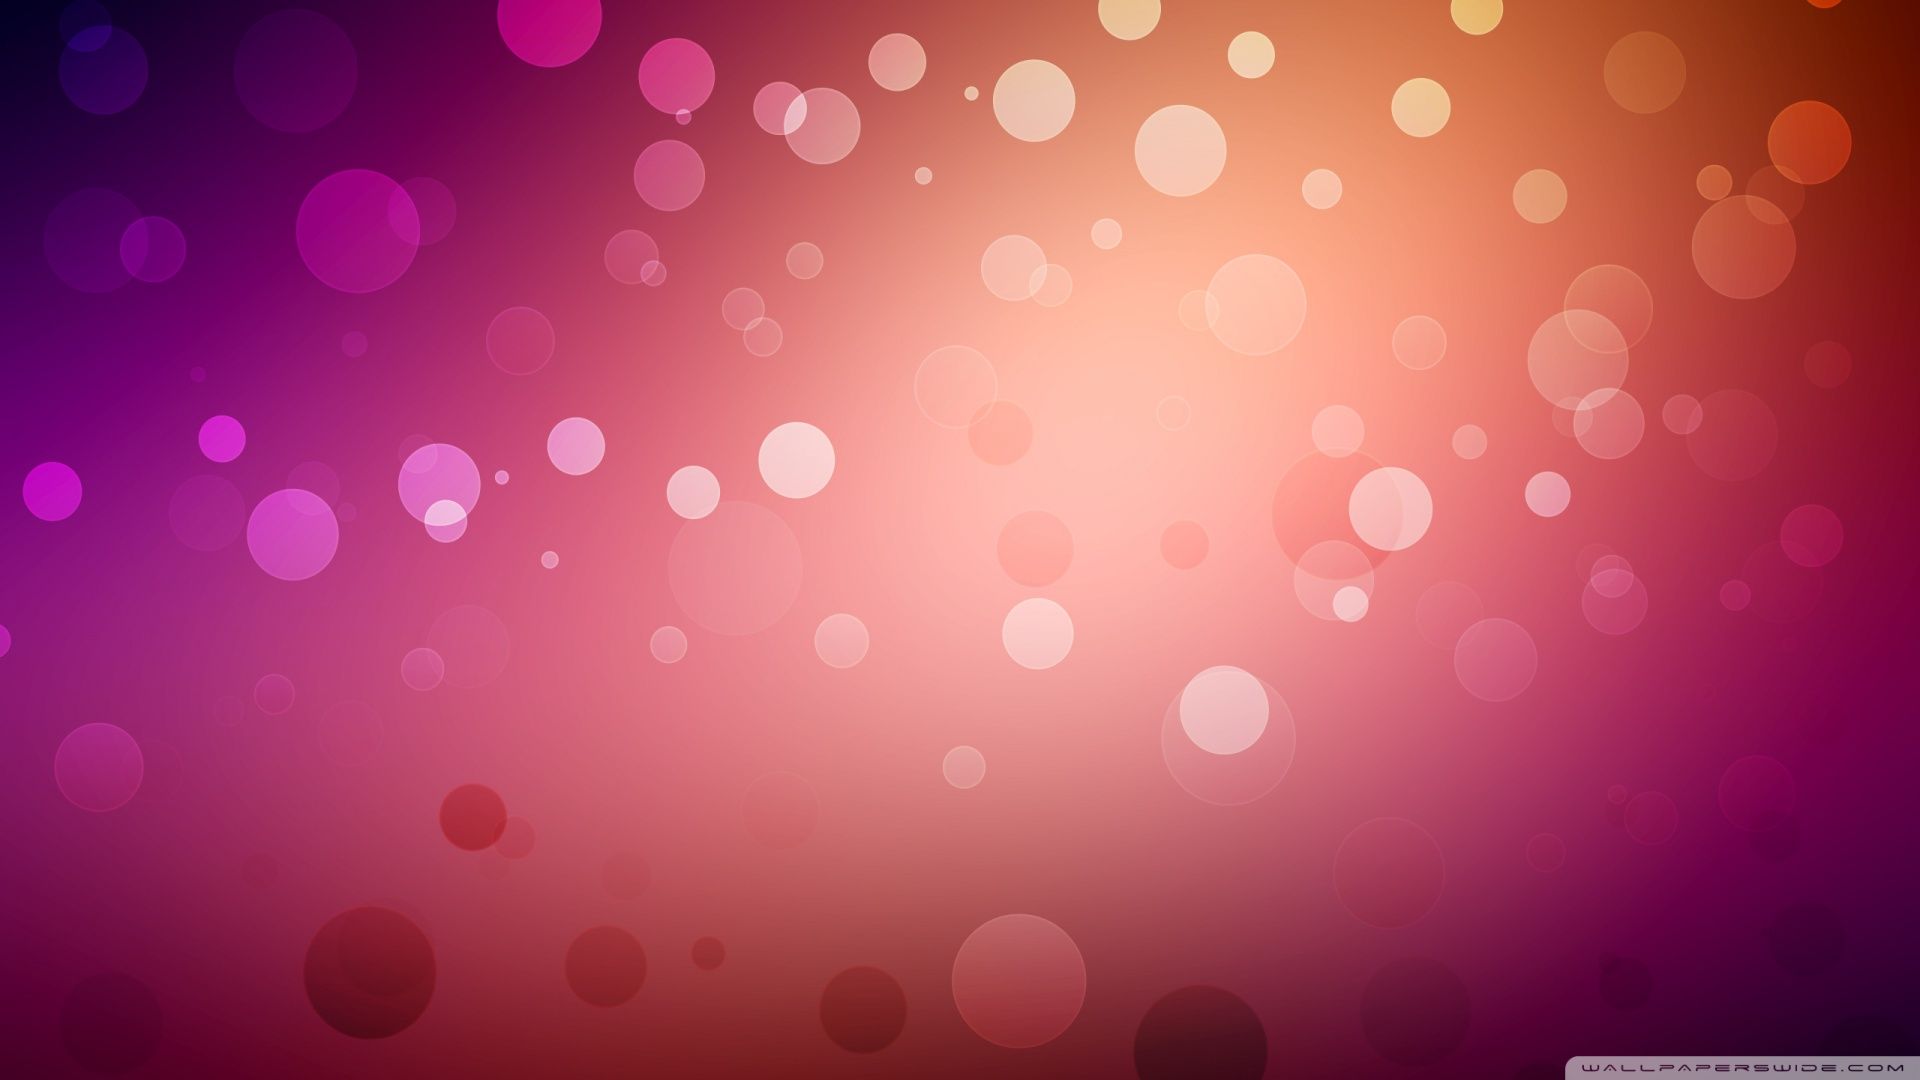 Free download Bokeh Effect Ultra HD Desktop Background Wallpaper for 4K UHD TV [1920x1080] for your Desktop, Mobile & Tablet. Explore Bokeh Effects Wallpaper. Wallpaper with Sound Effects